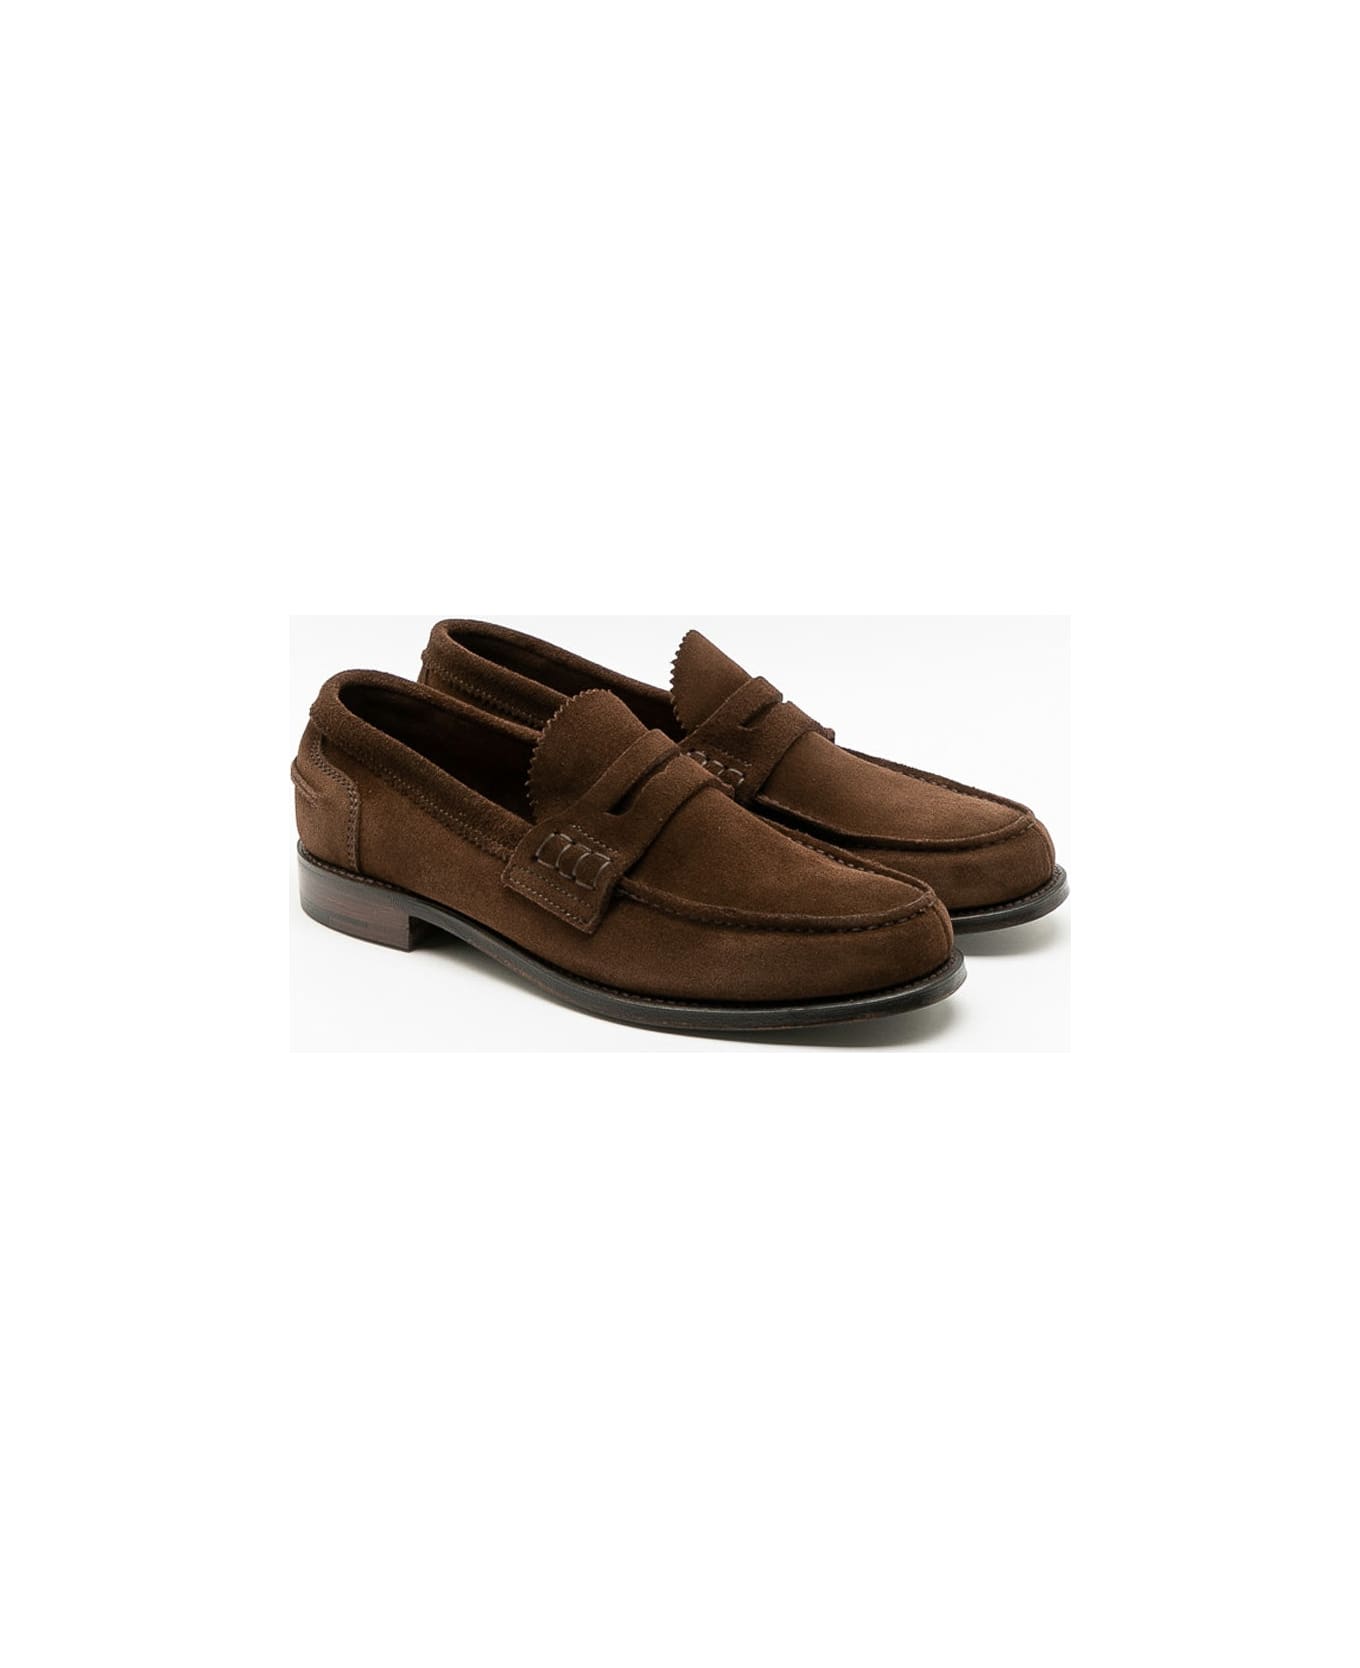 Cheaney Plough Suede Loafer - Marrone